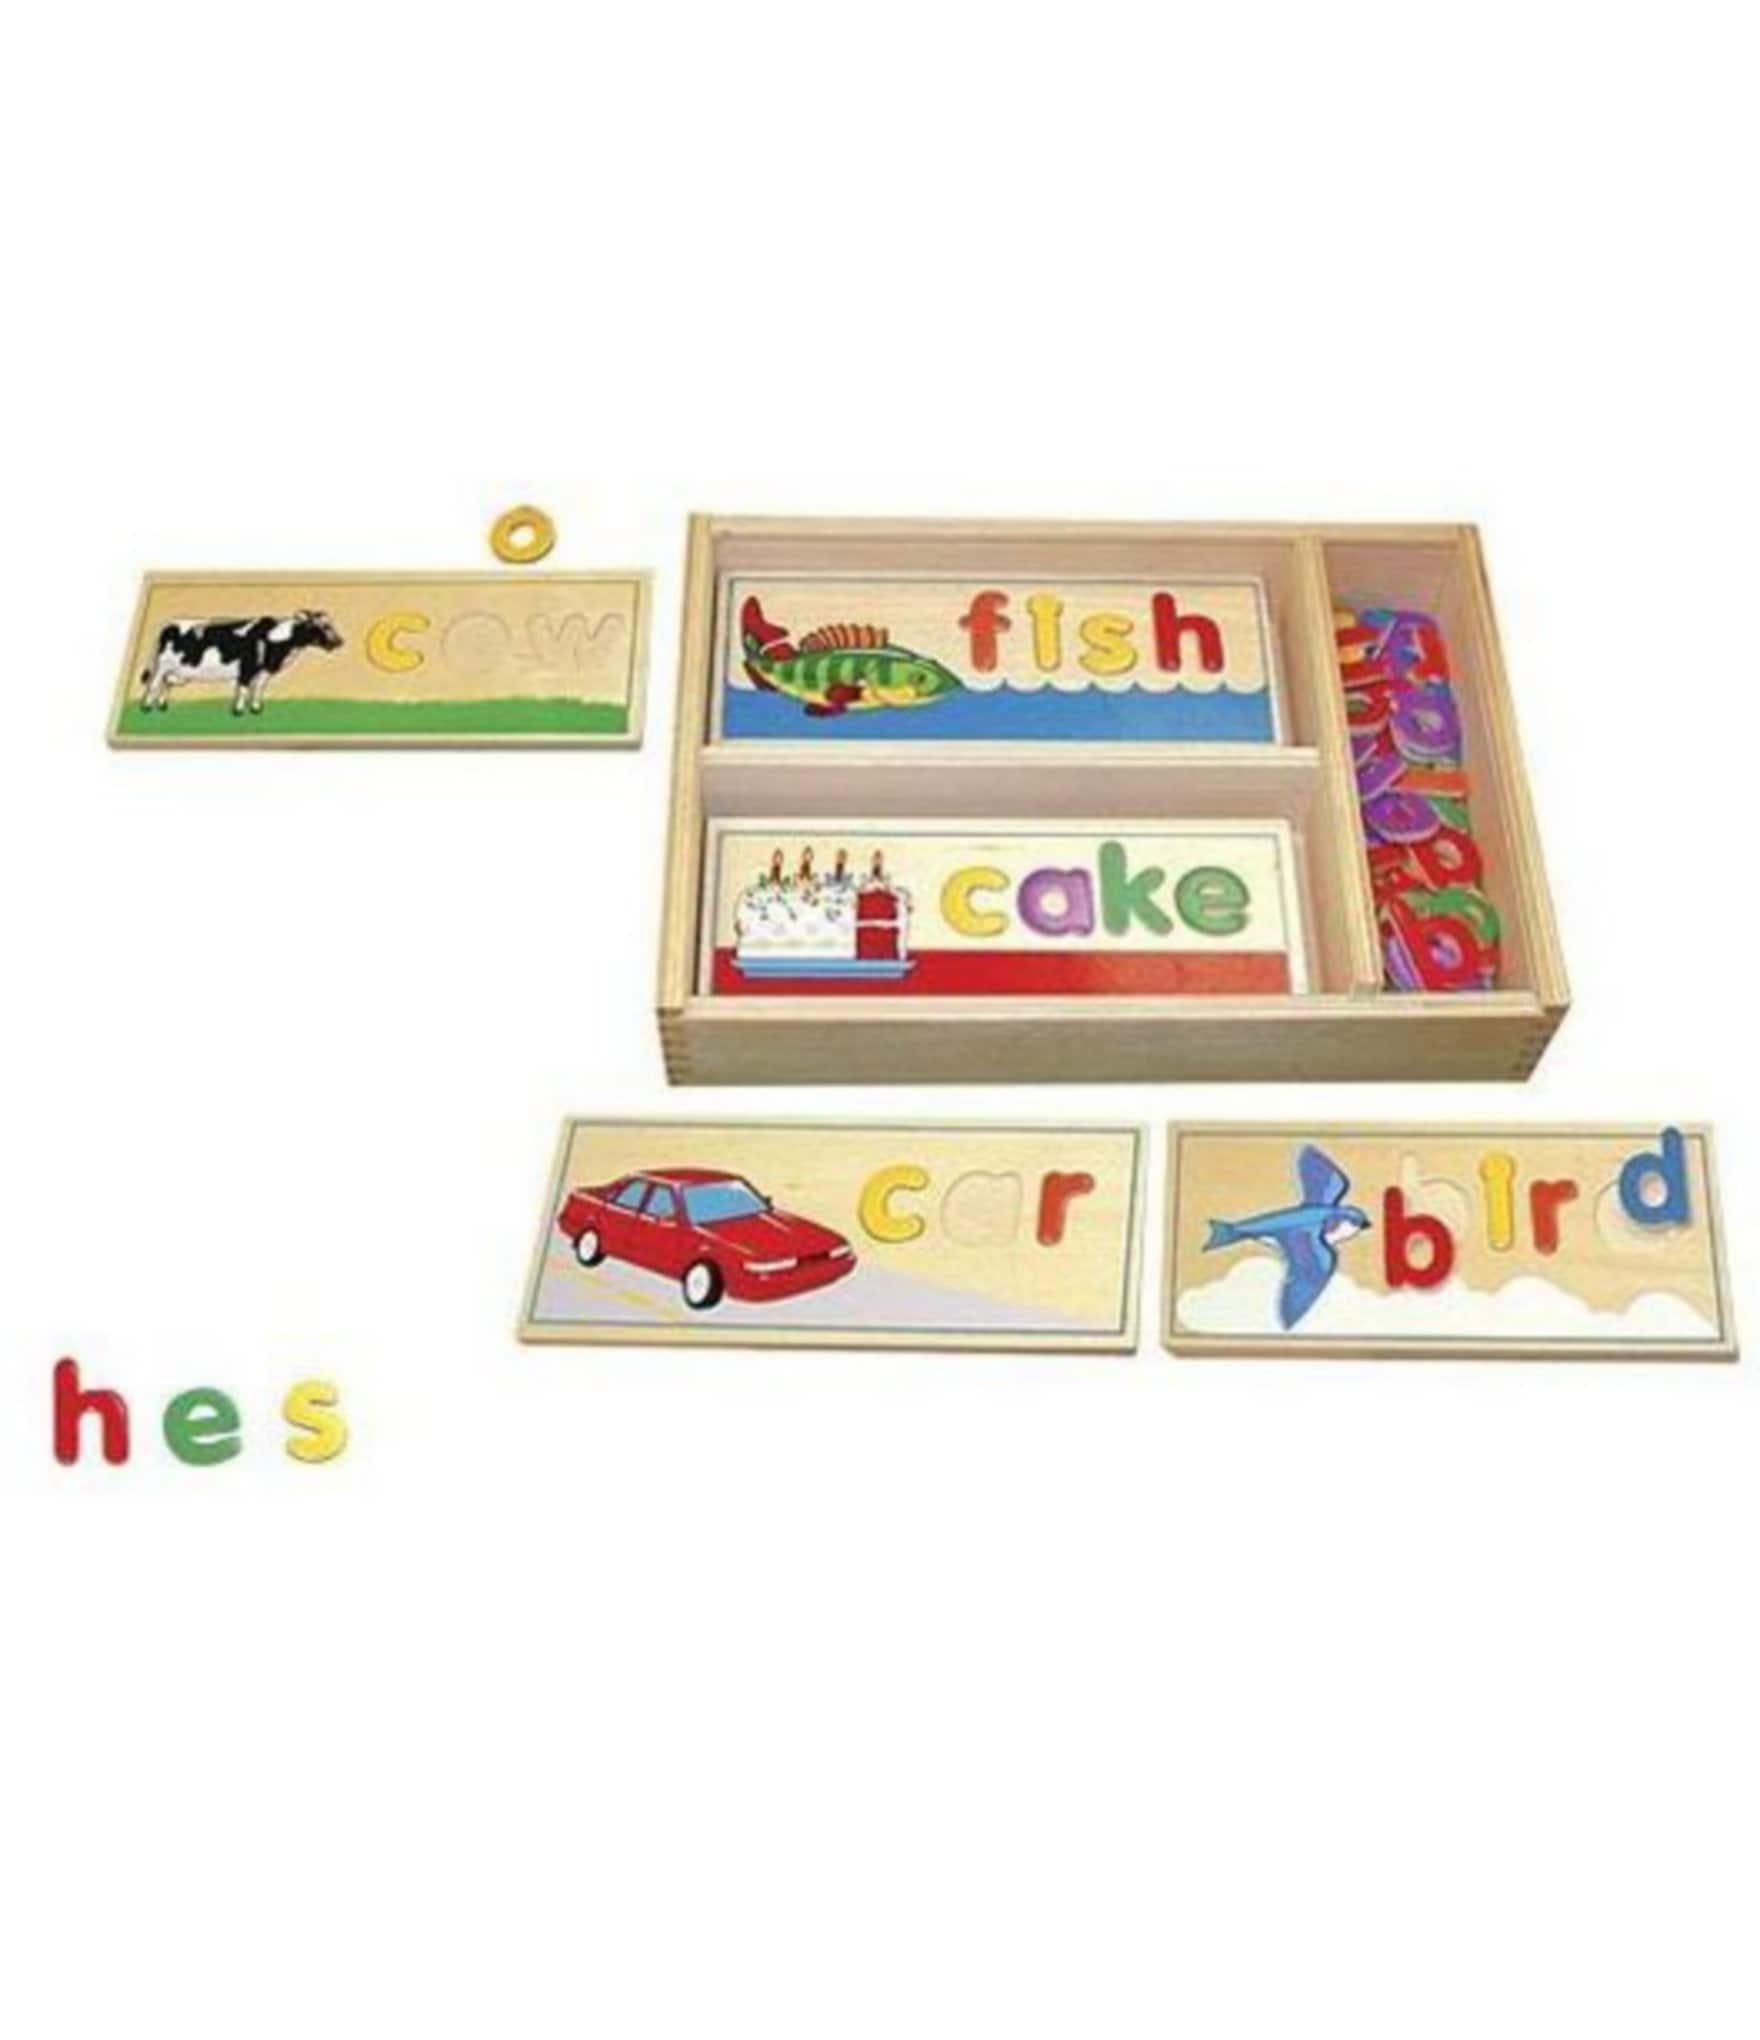 melissa and doug see & spell learning toy